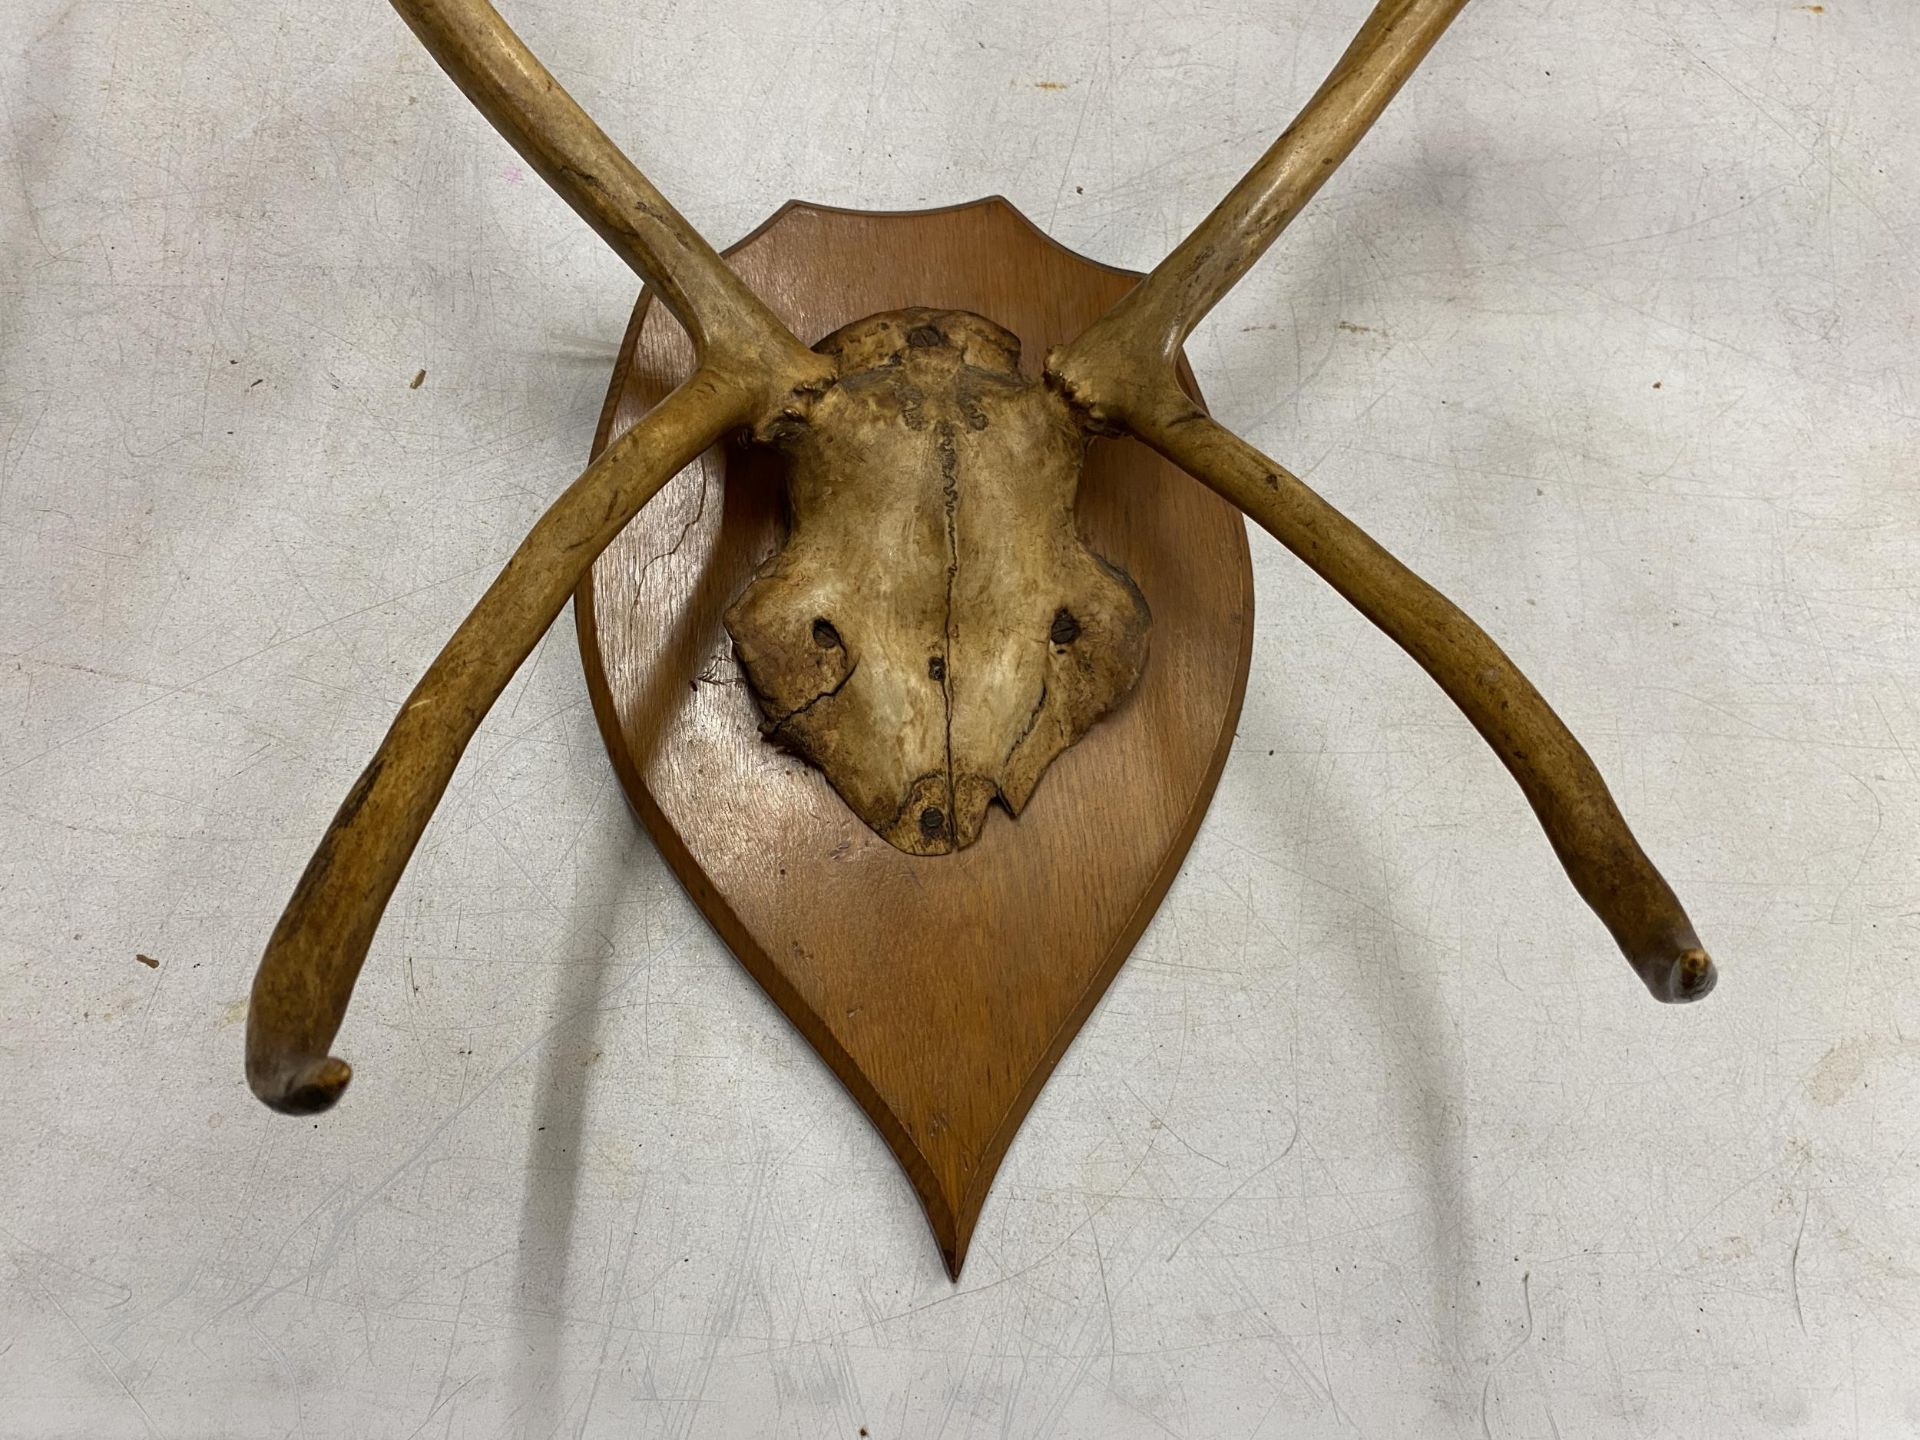 A LARGE PAIR OF TAXIDERMY STAG ANTLERS, LENGTH APPROX 80CM - Image 2 of 4